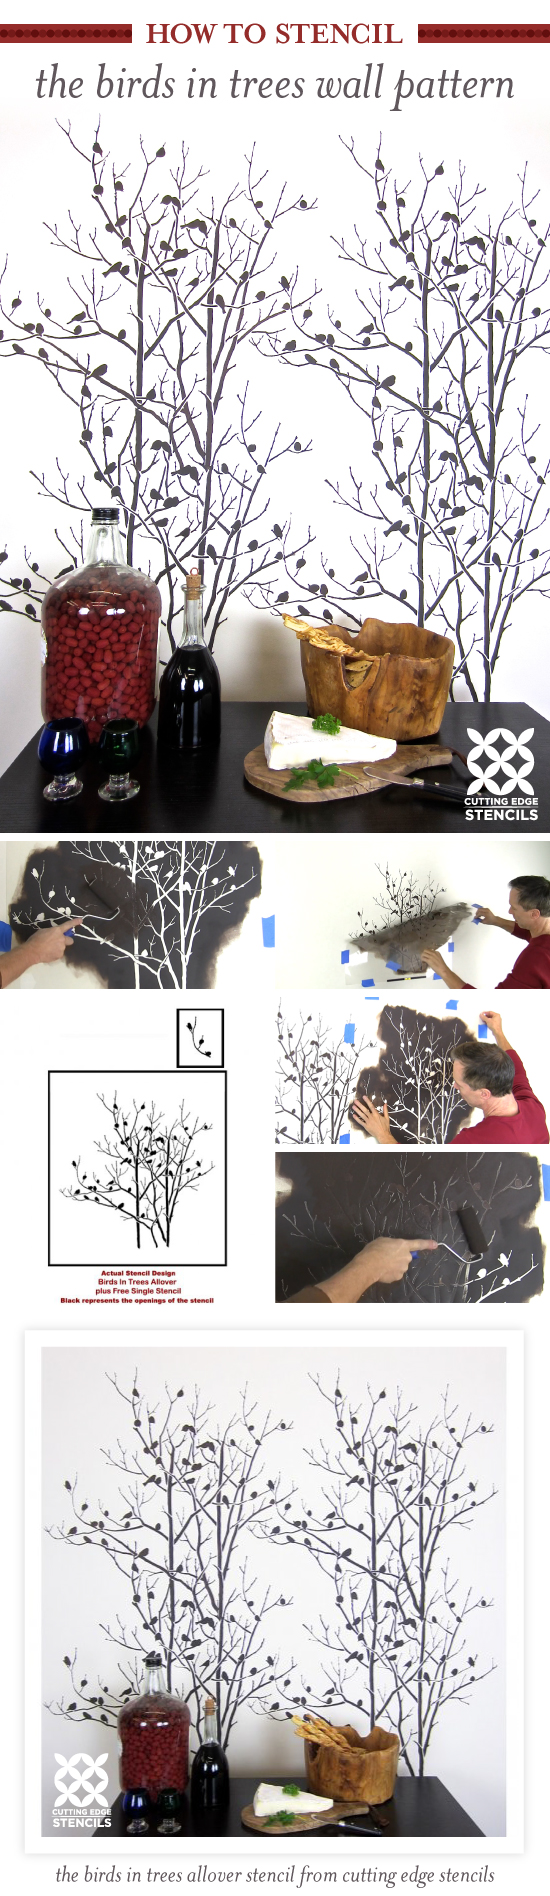 Cutting Edge Stencils shares how to stencil an accent wall using the Birds In Trees Allover Stencil pattern. http://www.cuttingedgestencils.com/birds-in-trees-wall-stencil-pattern.html